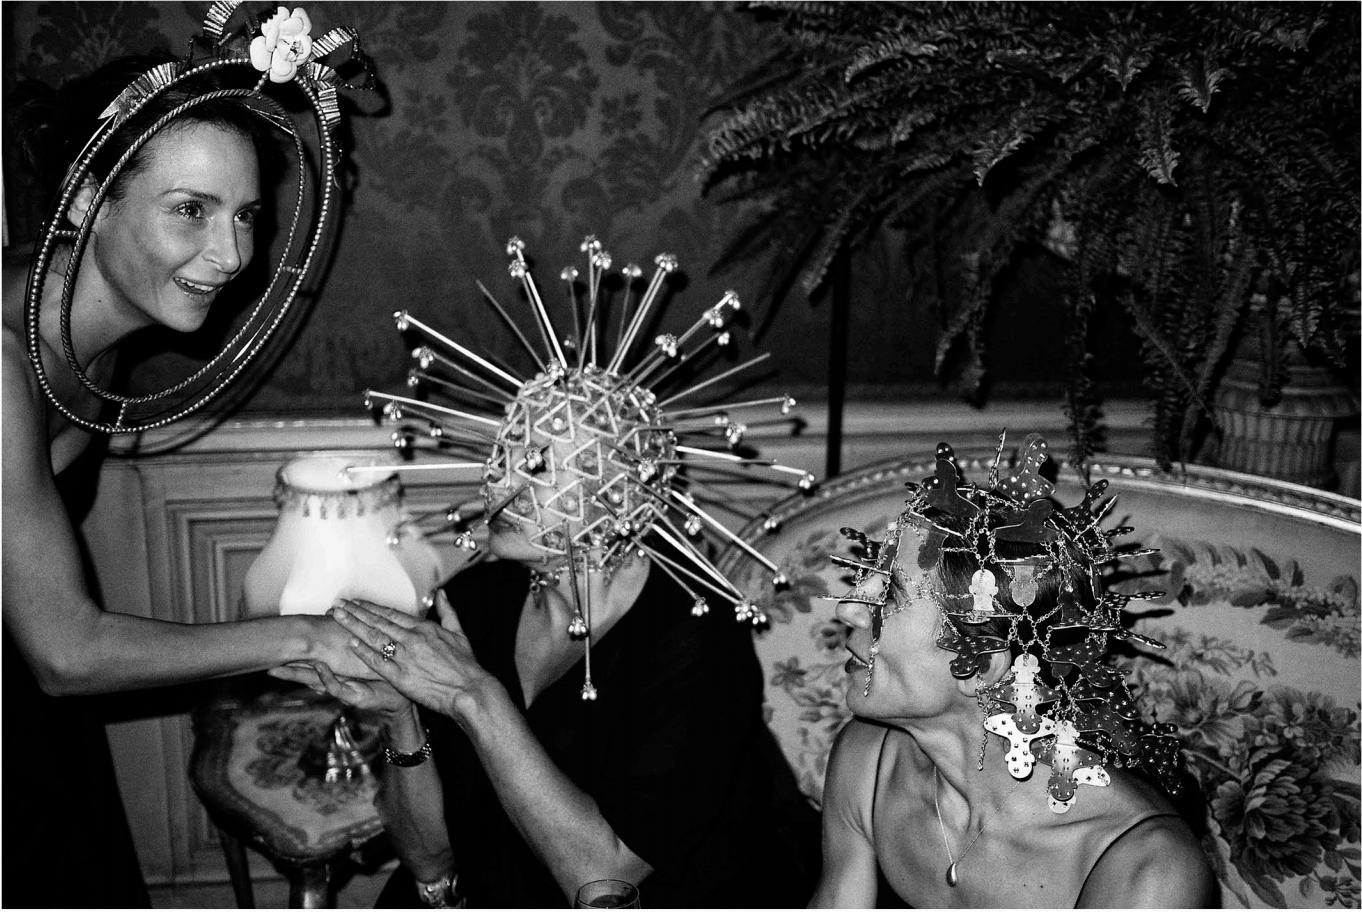 Untitled 3 (Paris), 2010 by Arslan Sükan
From the series  La Notte
Black and white archival inkjet print on baryta photographic paper
Image size: 50 cm H x 75 cm W
Edition 2/6 + 1AP
Unframed

Sükan created the ‘La Notte’ series as he was working for